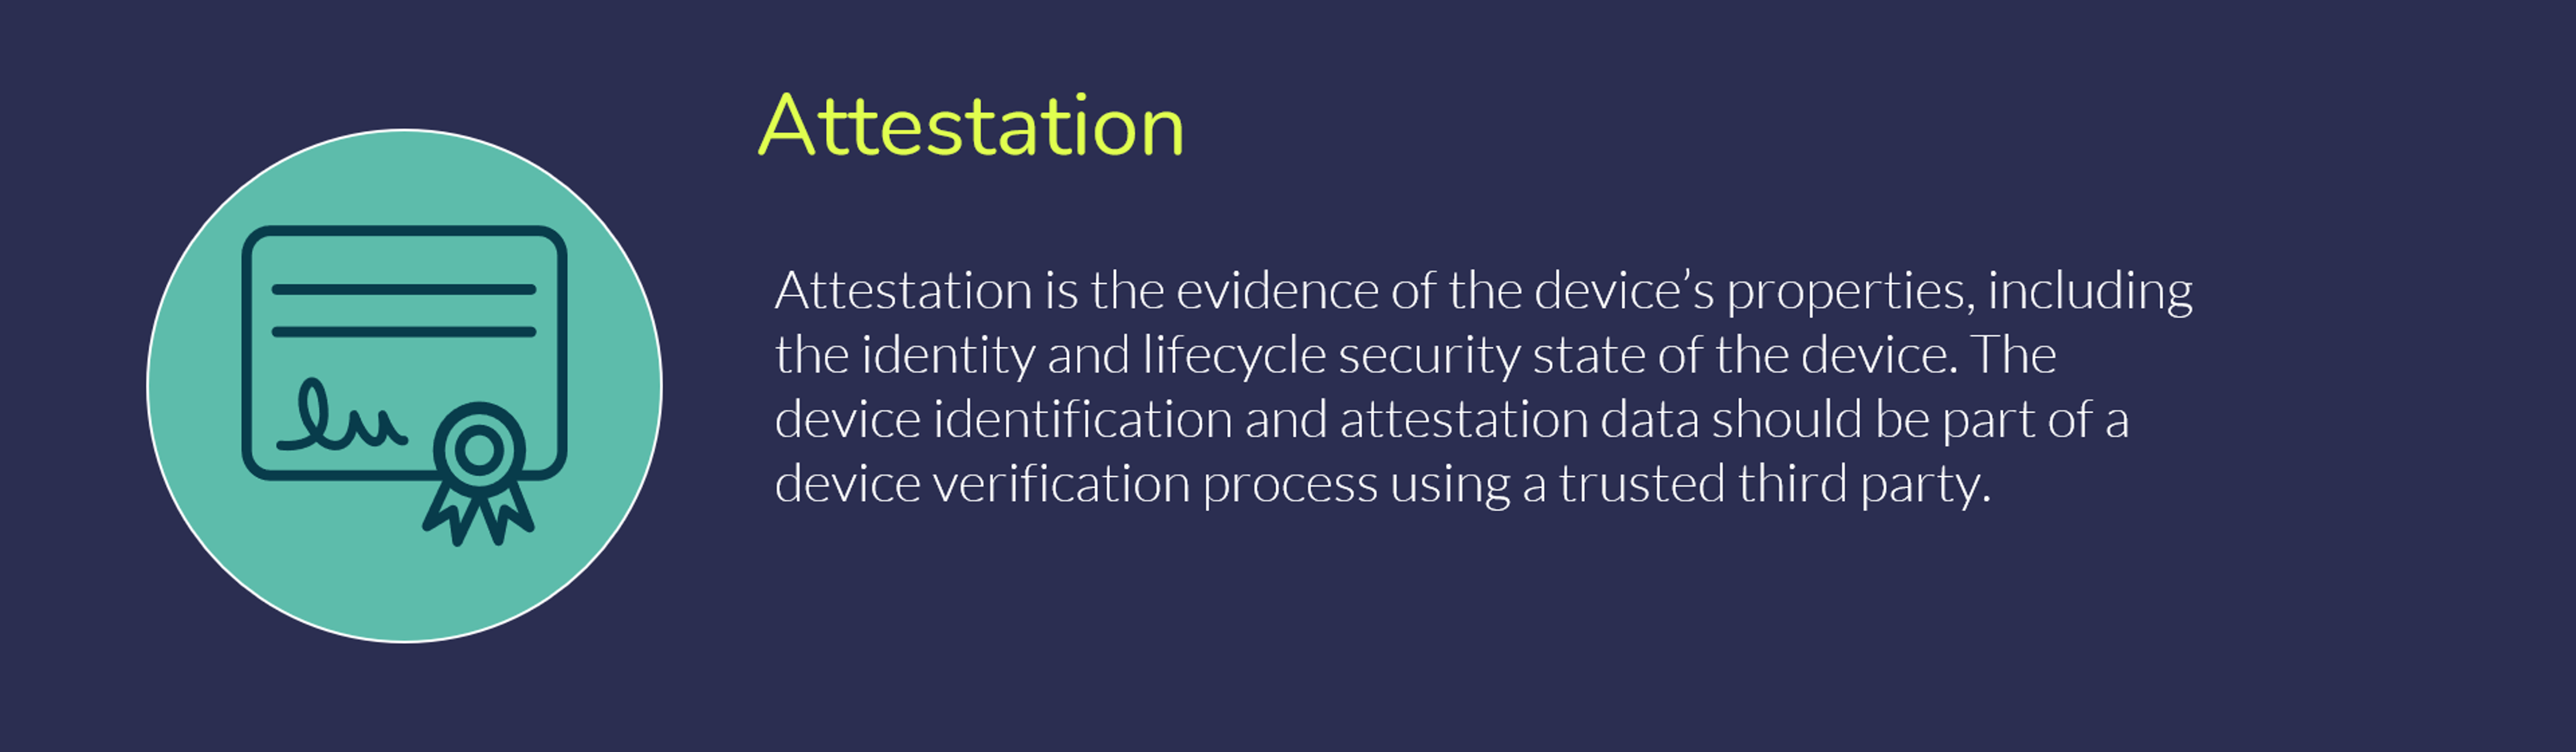 Attestation is the evidence of the device’s properties, including the identity and security state of the device.